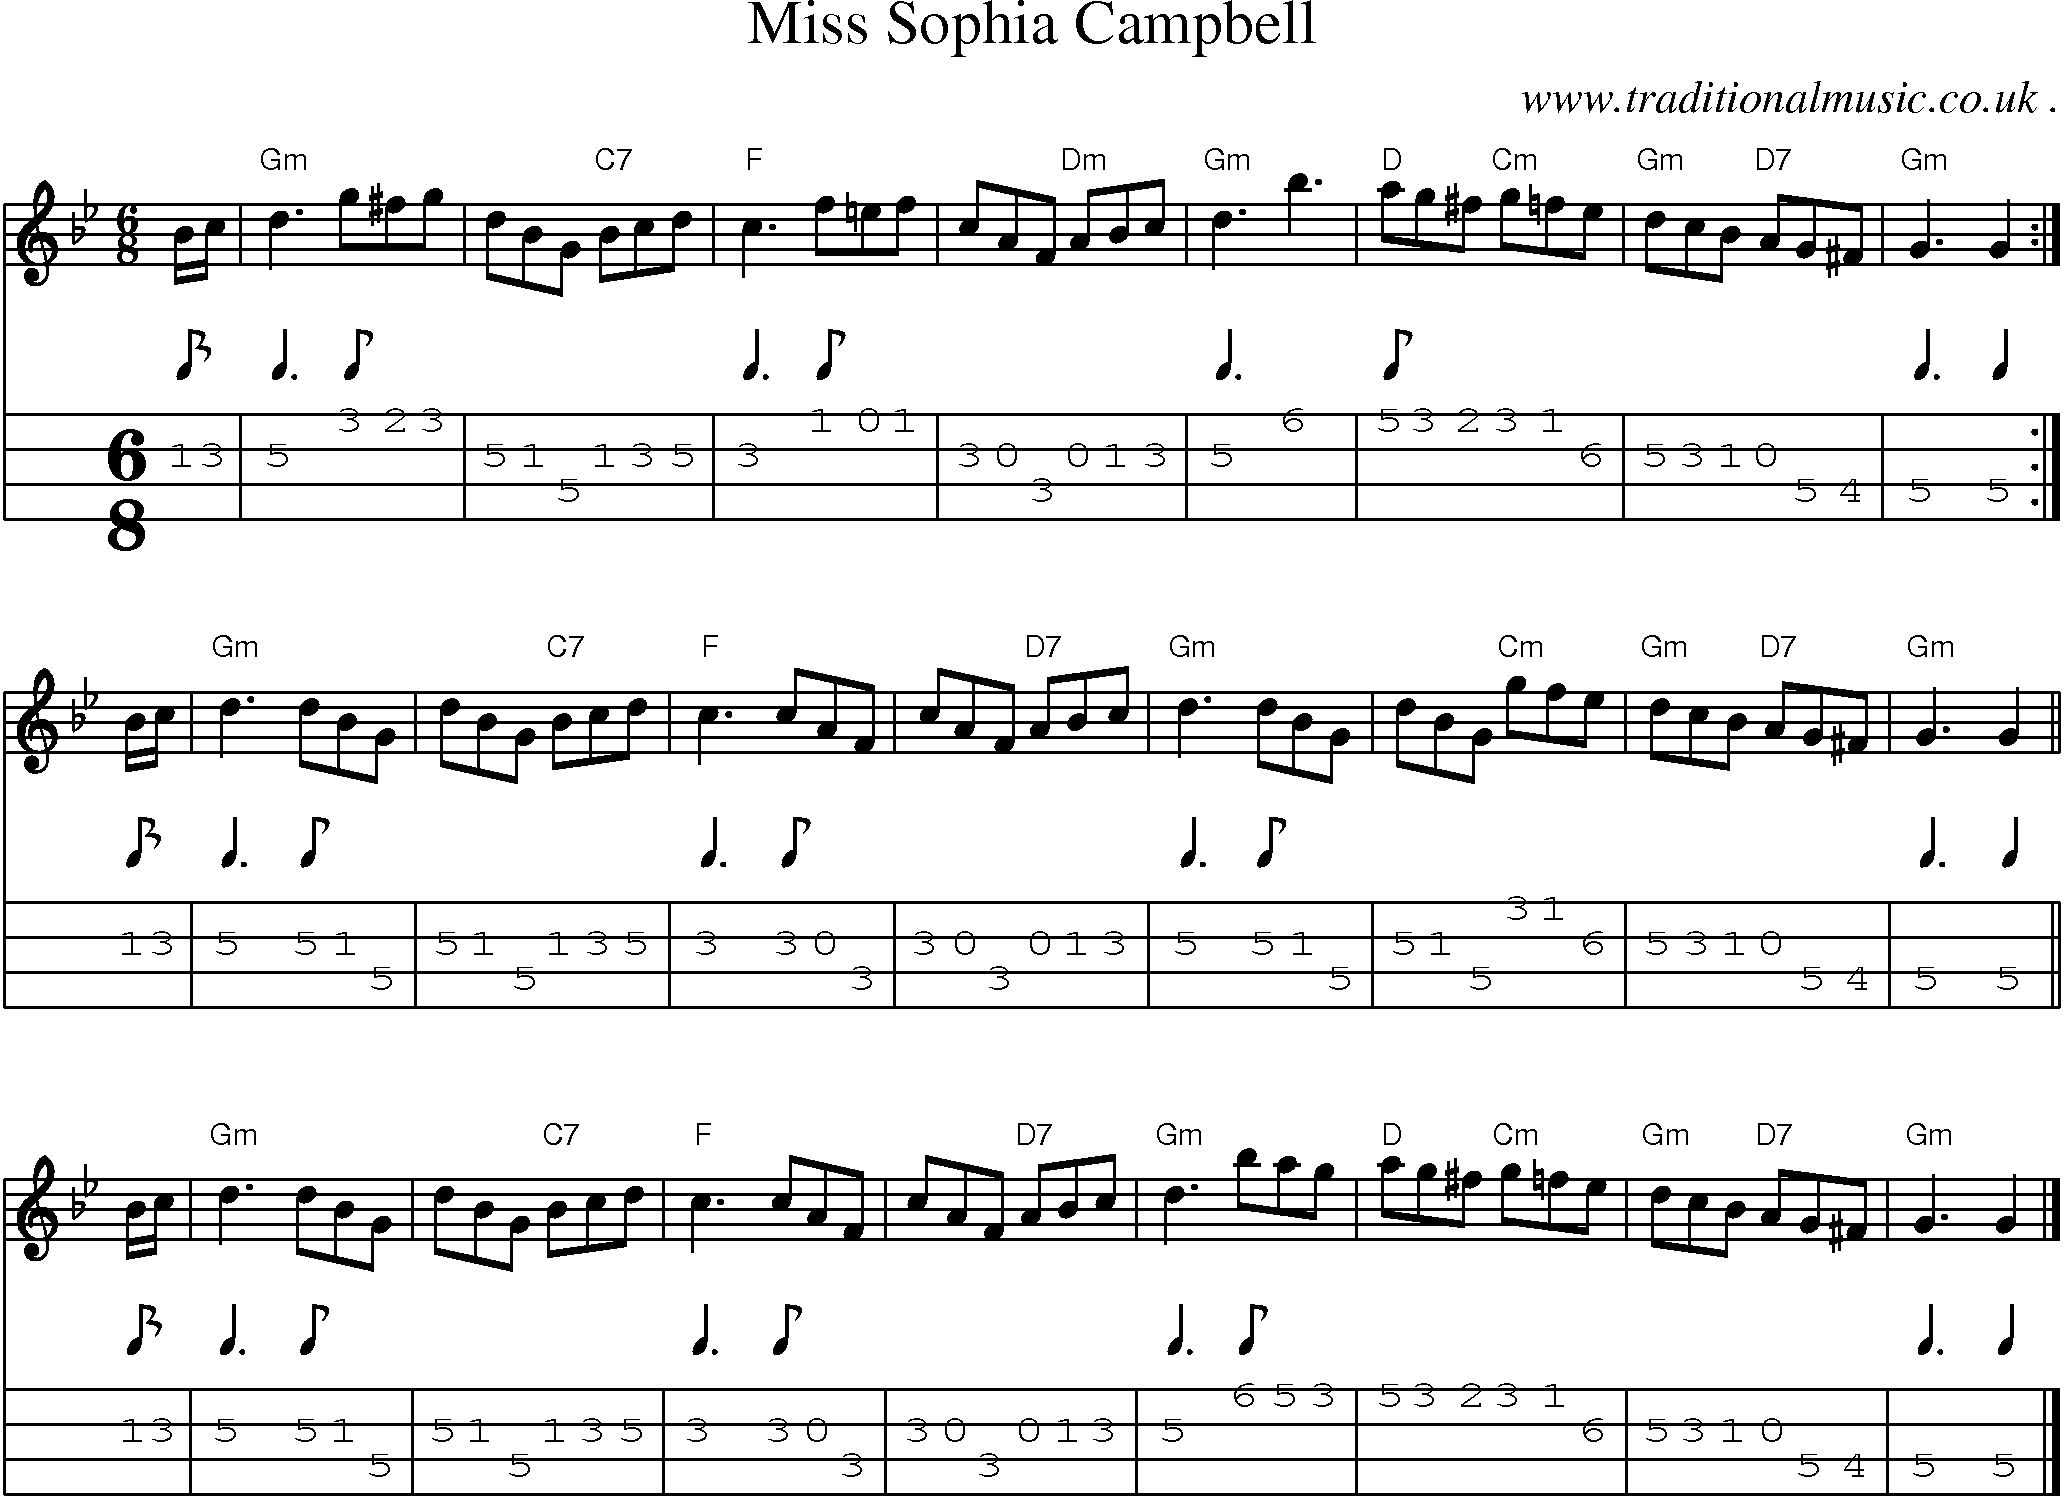 Sheet-music  score, Chords and Mandolin Tabs for Miss Sophia Campbell